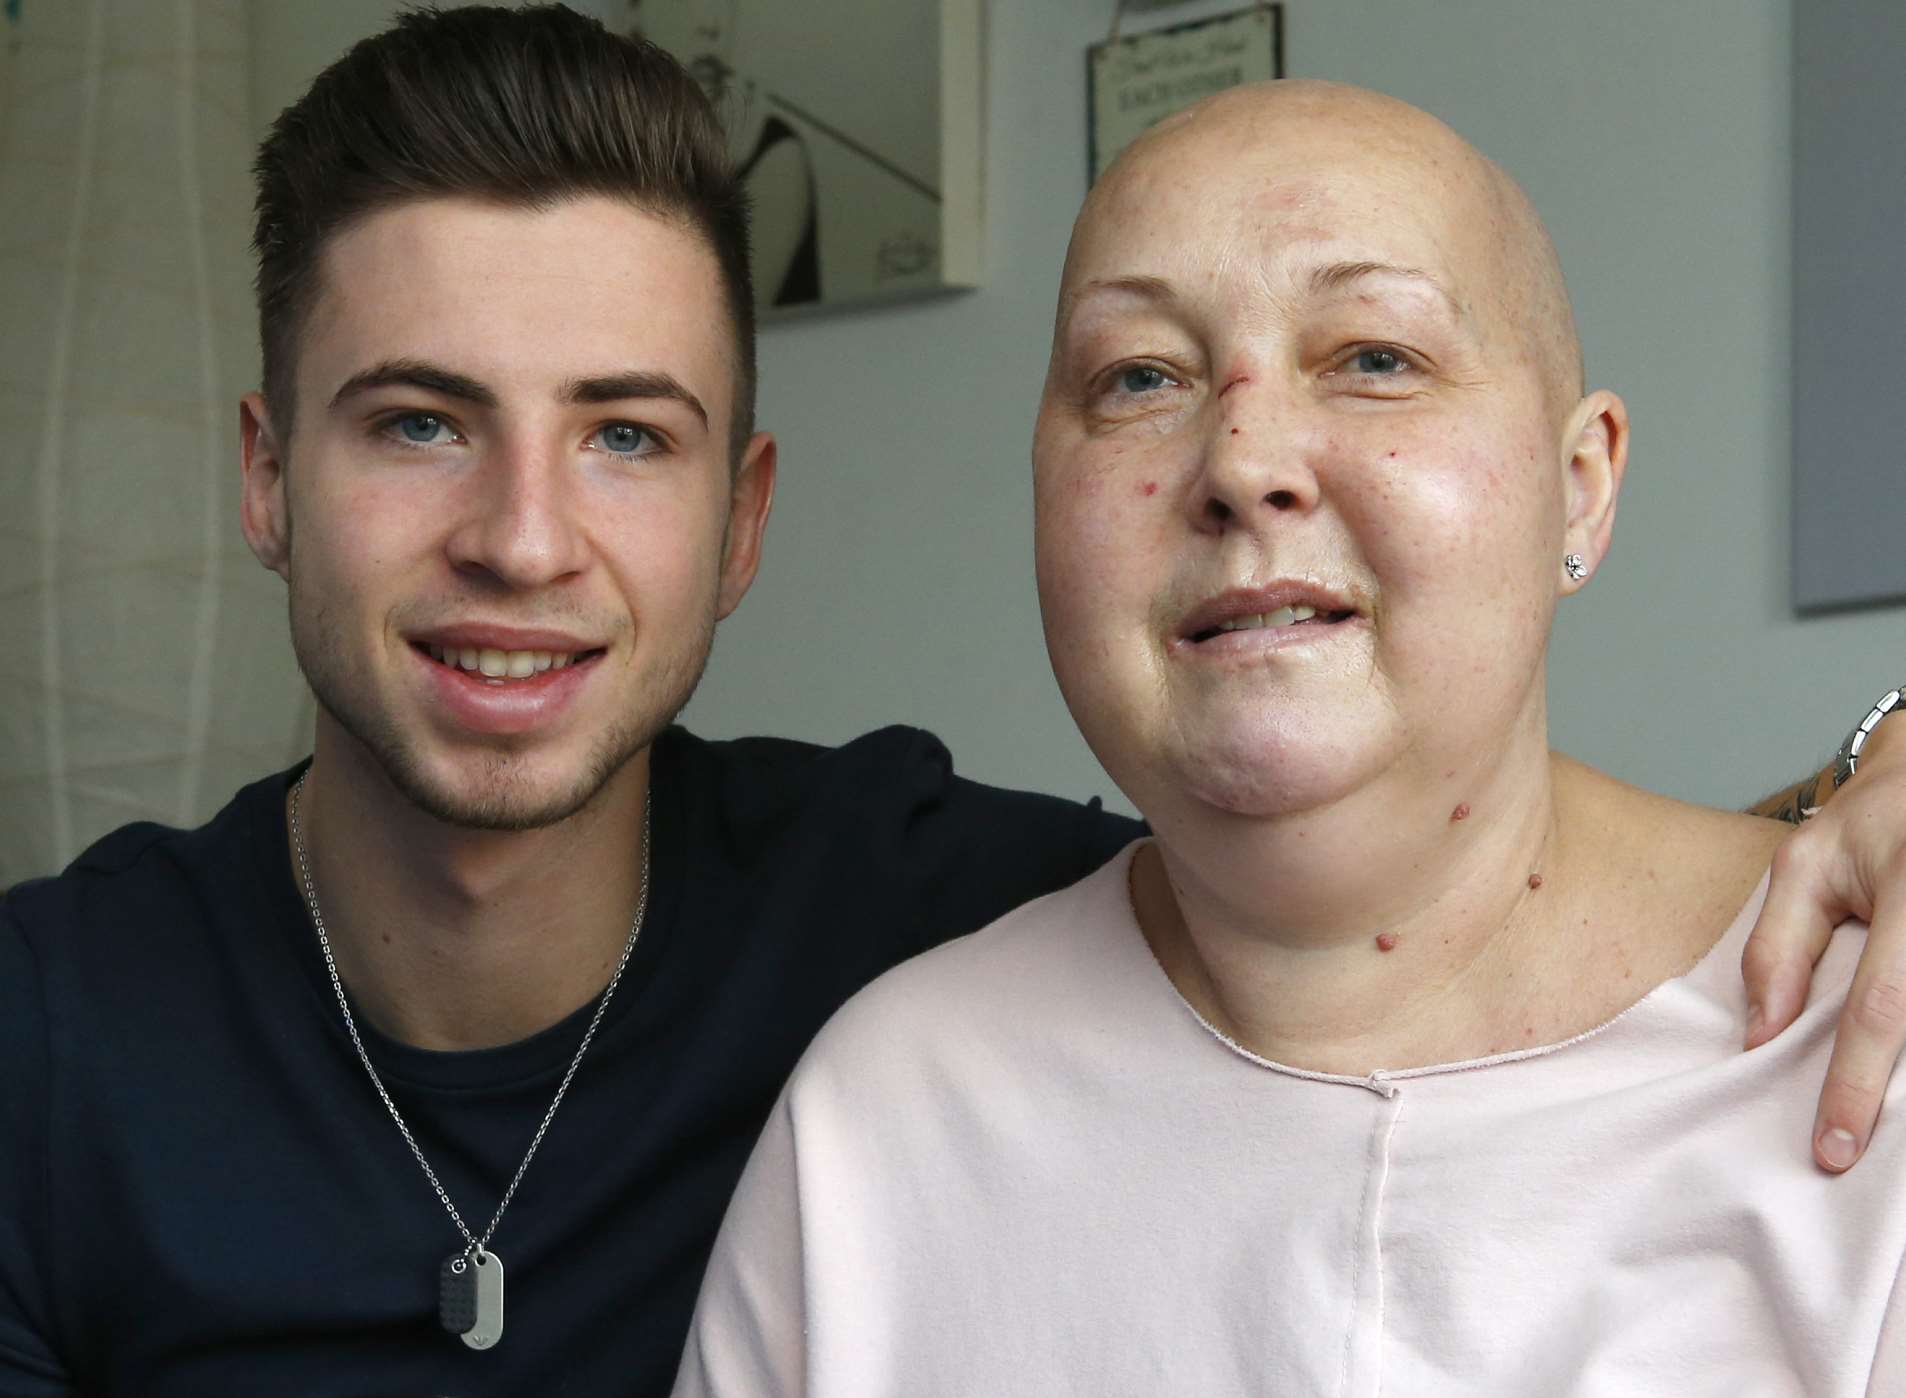 Tania Mackelden has been diagnosed with terminal cancer, and son Tom is organising a charity football match